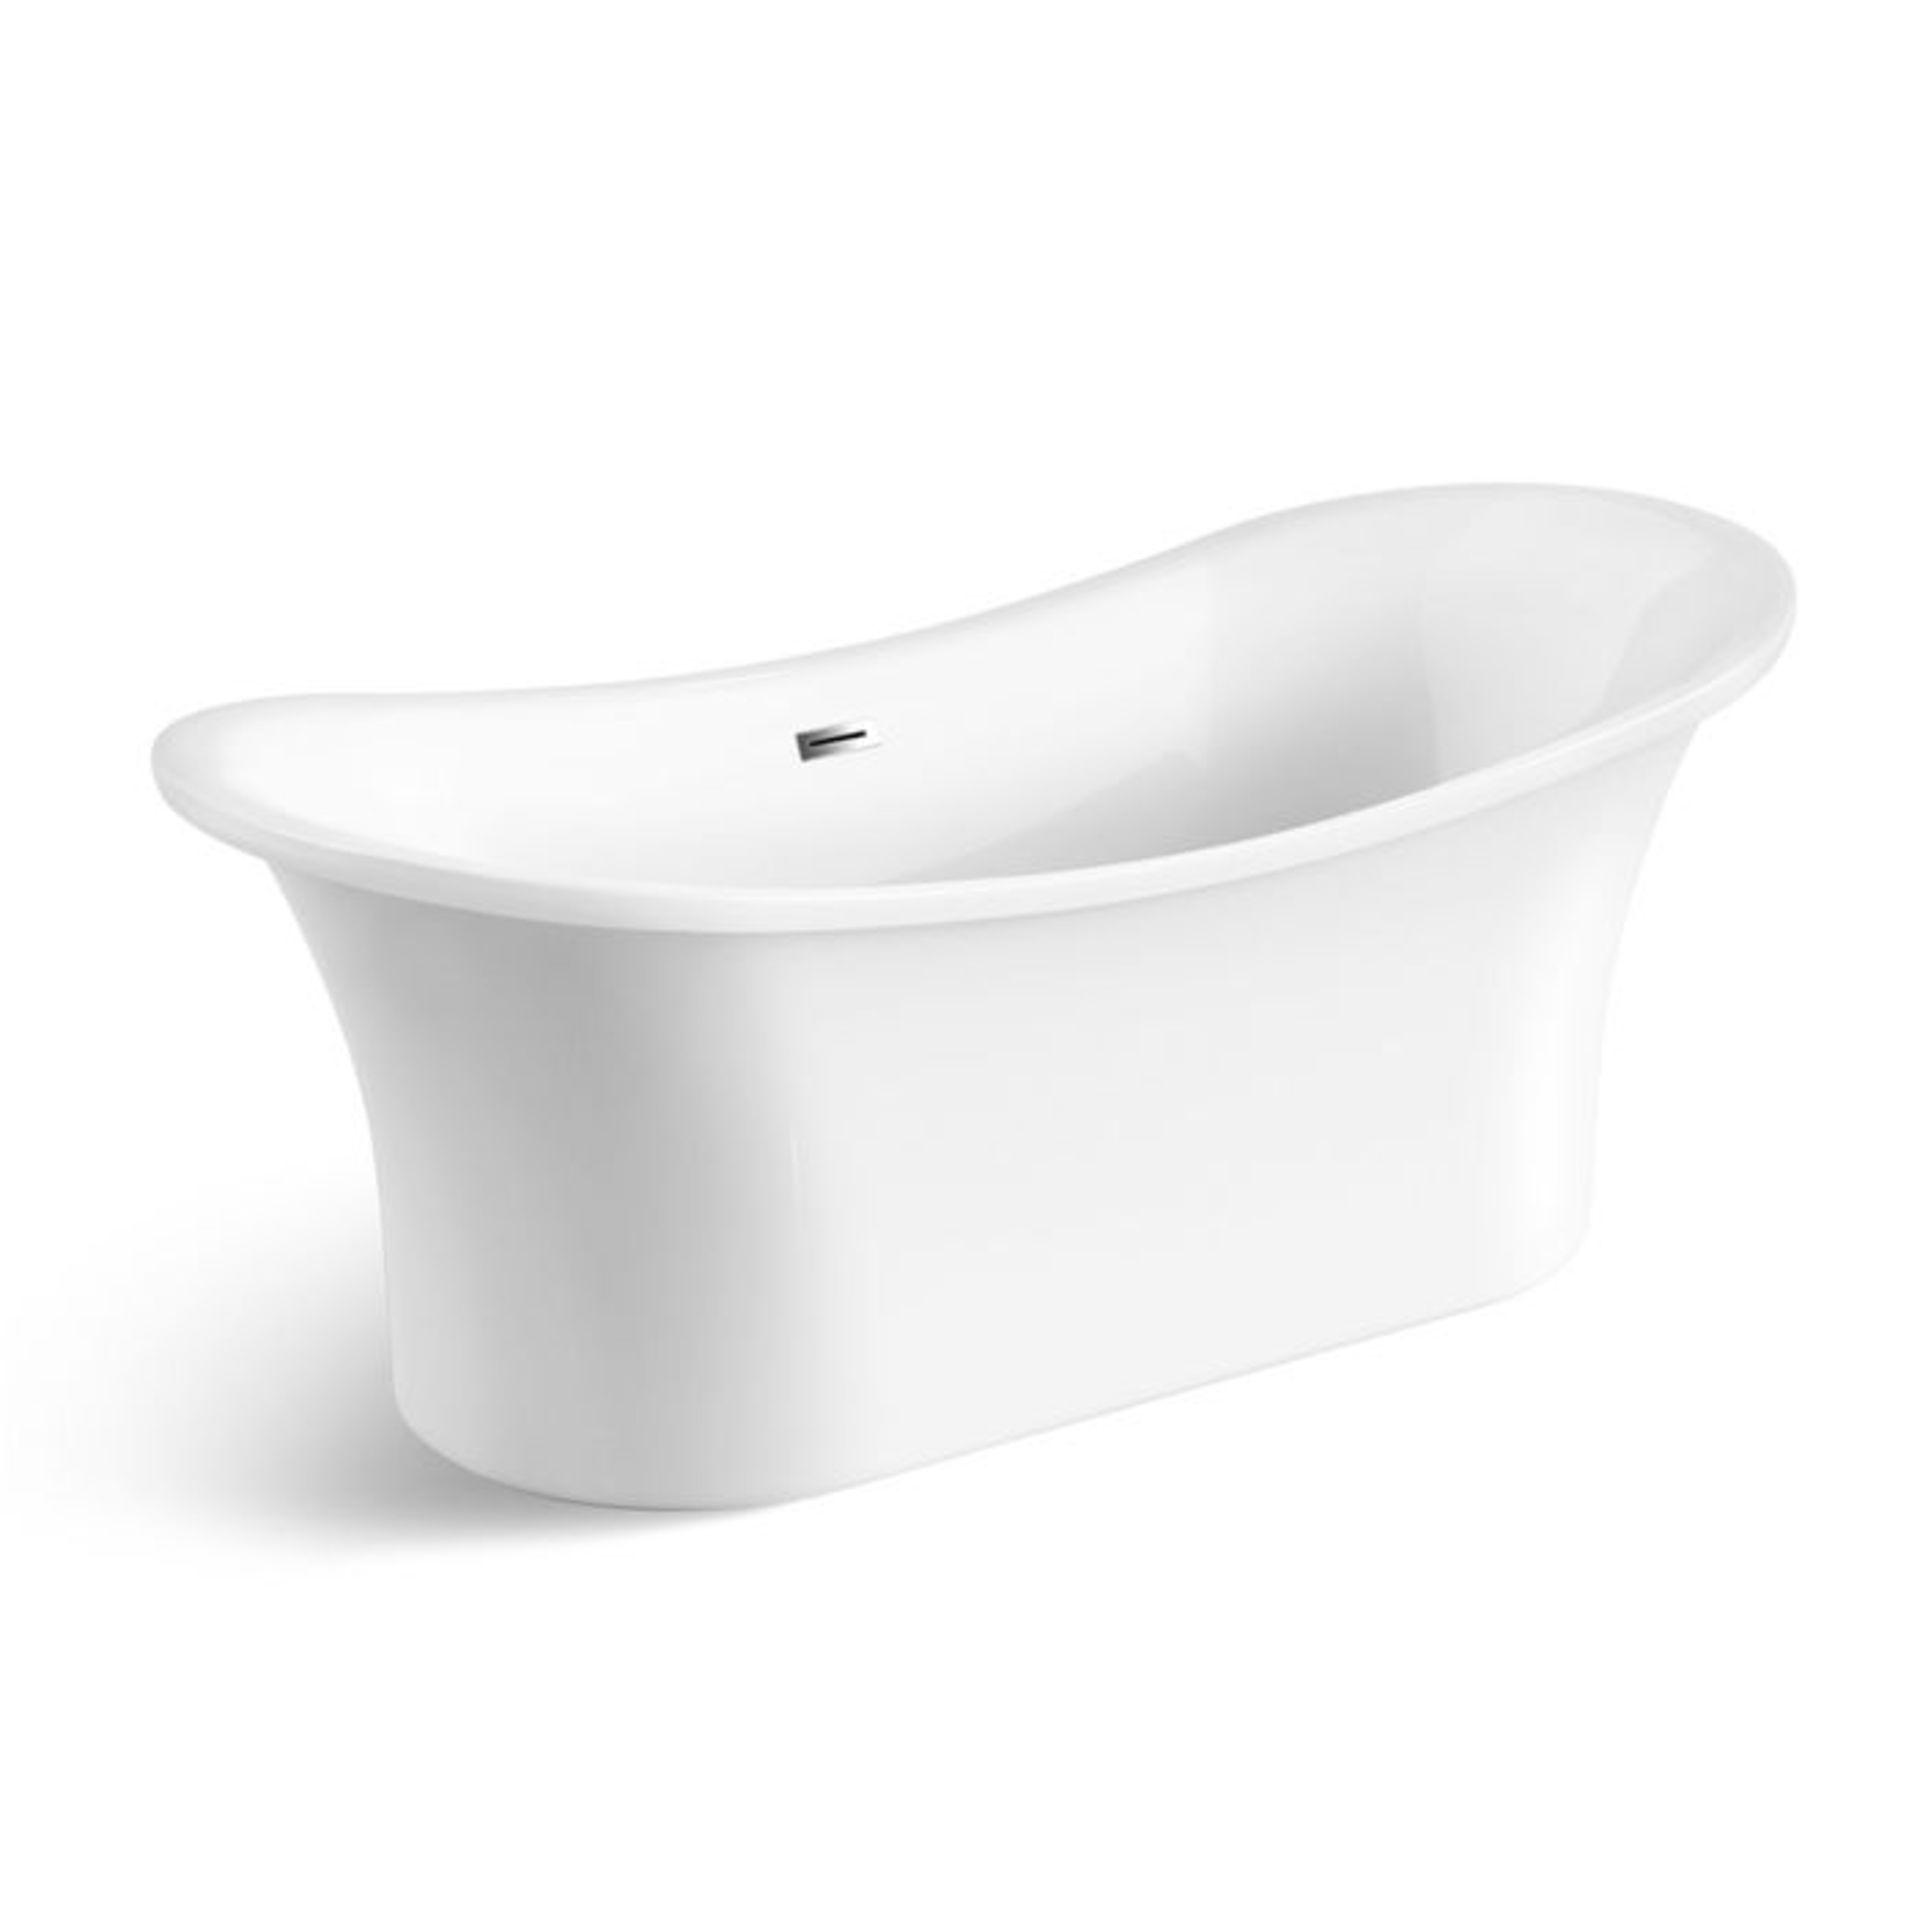 (AL4) 1815mmx800mm Freya Freestanding Bath. Manufactured from High Quality Acrylic, complimented - Image 2 of 3